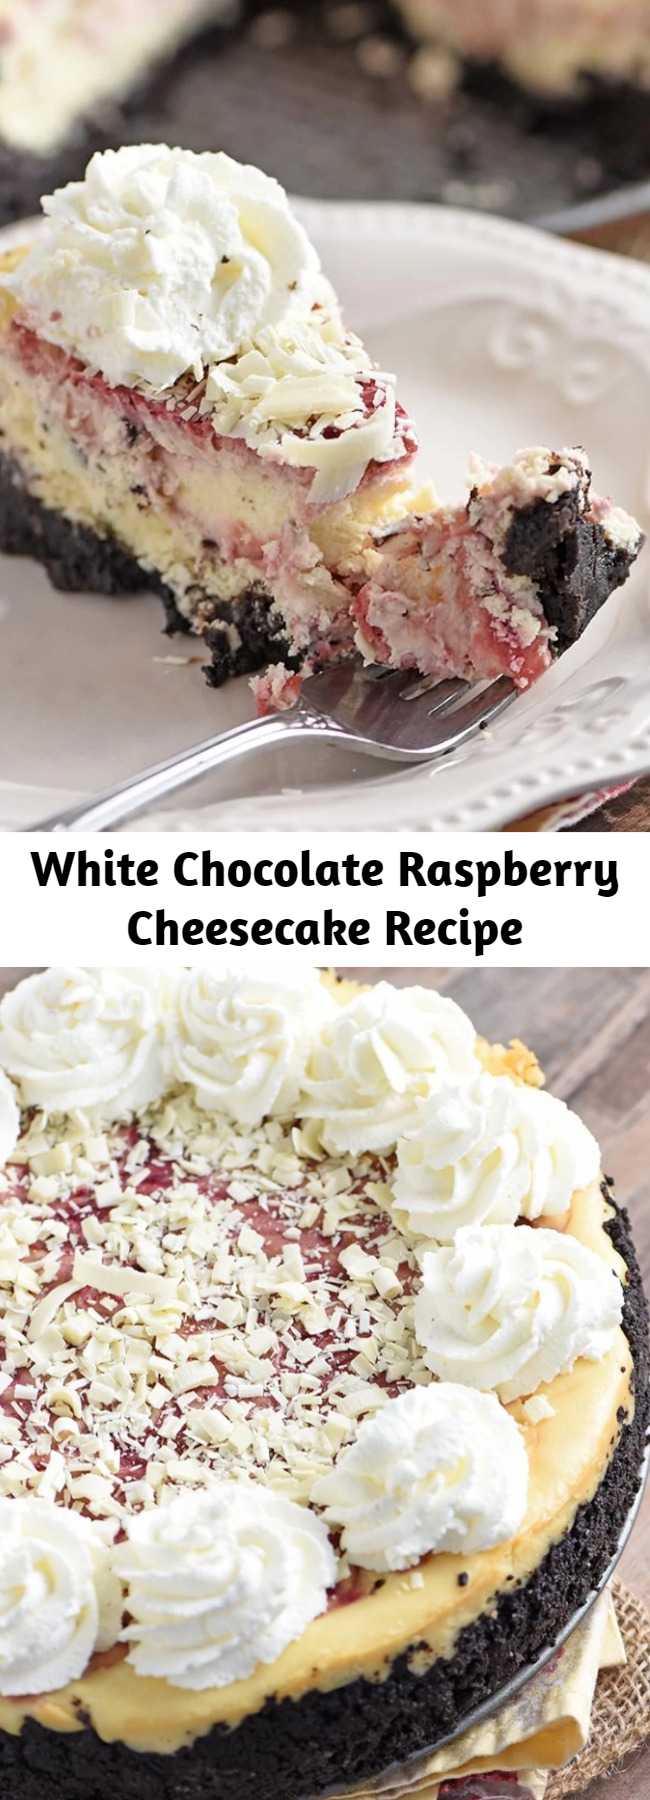 White Chocolate Raspberry Cheesecake Recipe - Make Olive Garden’s white chocolate raspberry cheesecake at home. Who doesn’t love a decadent homemade dessert with a raspberry swirl and Oreo cookie crust? #cheesecake #OliveGarden #copycatrecipes #dessertrecipes